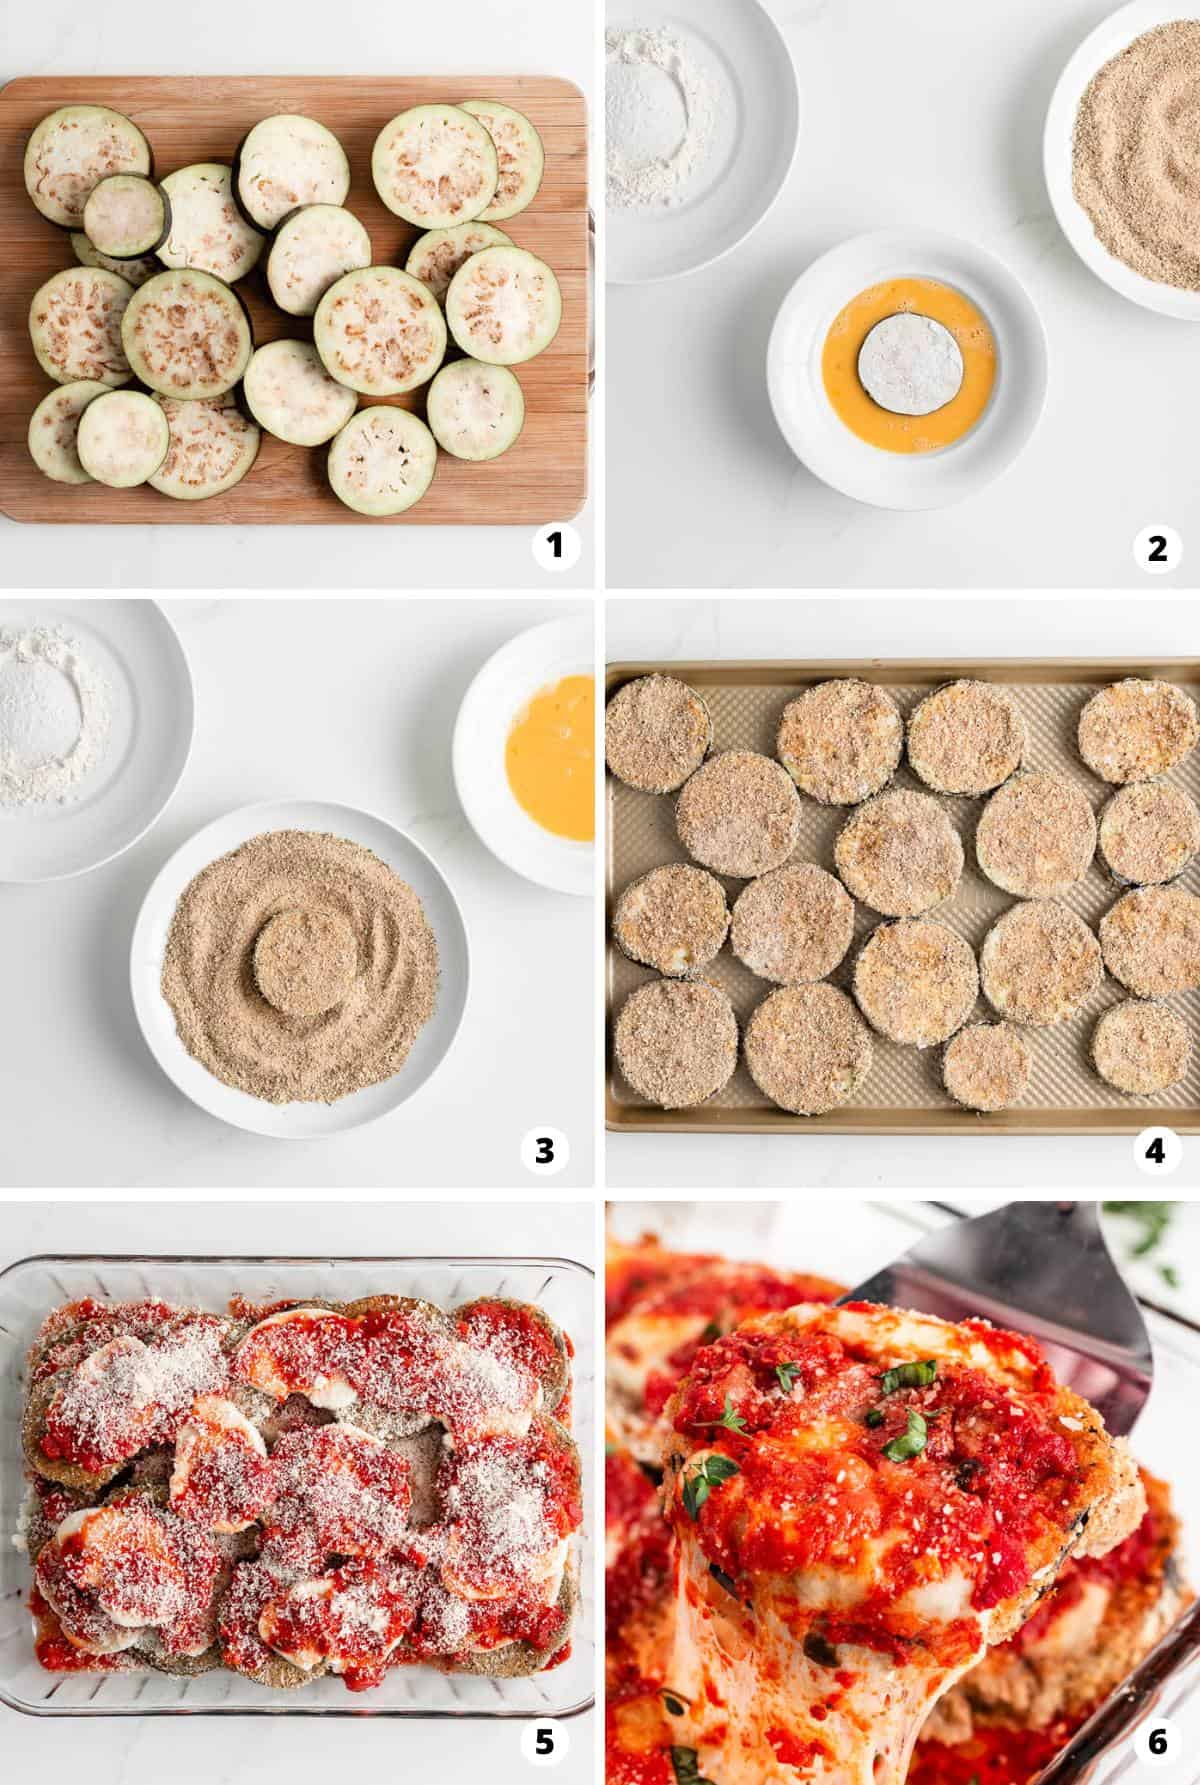 Showing how to make eggplant parmesan in a 6 step collage.